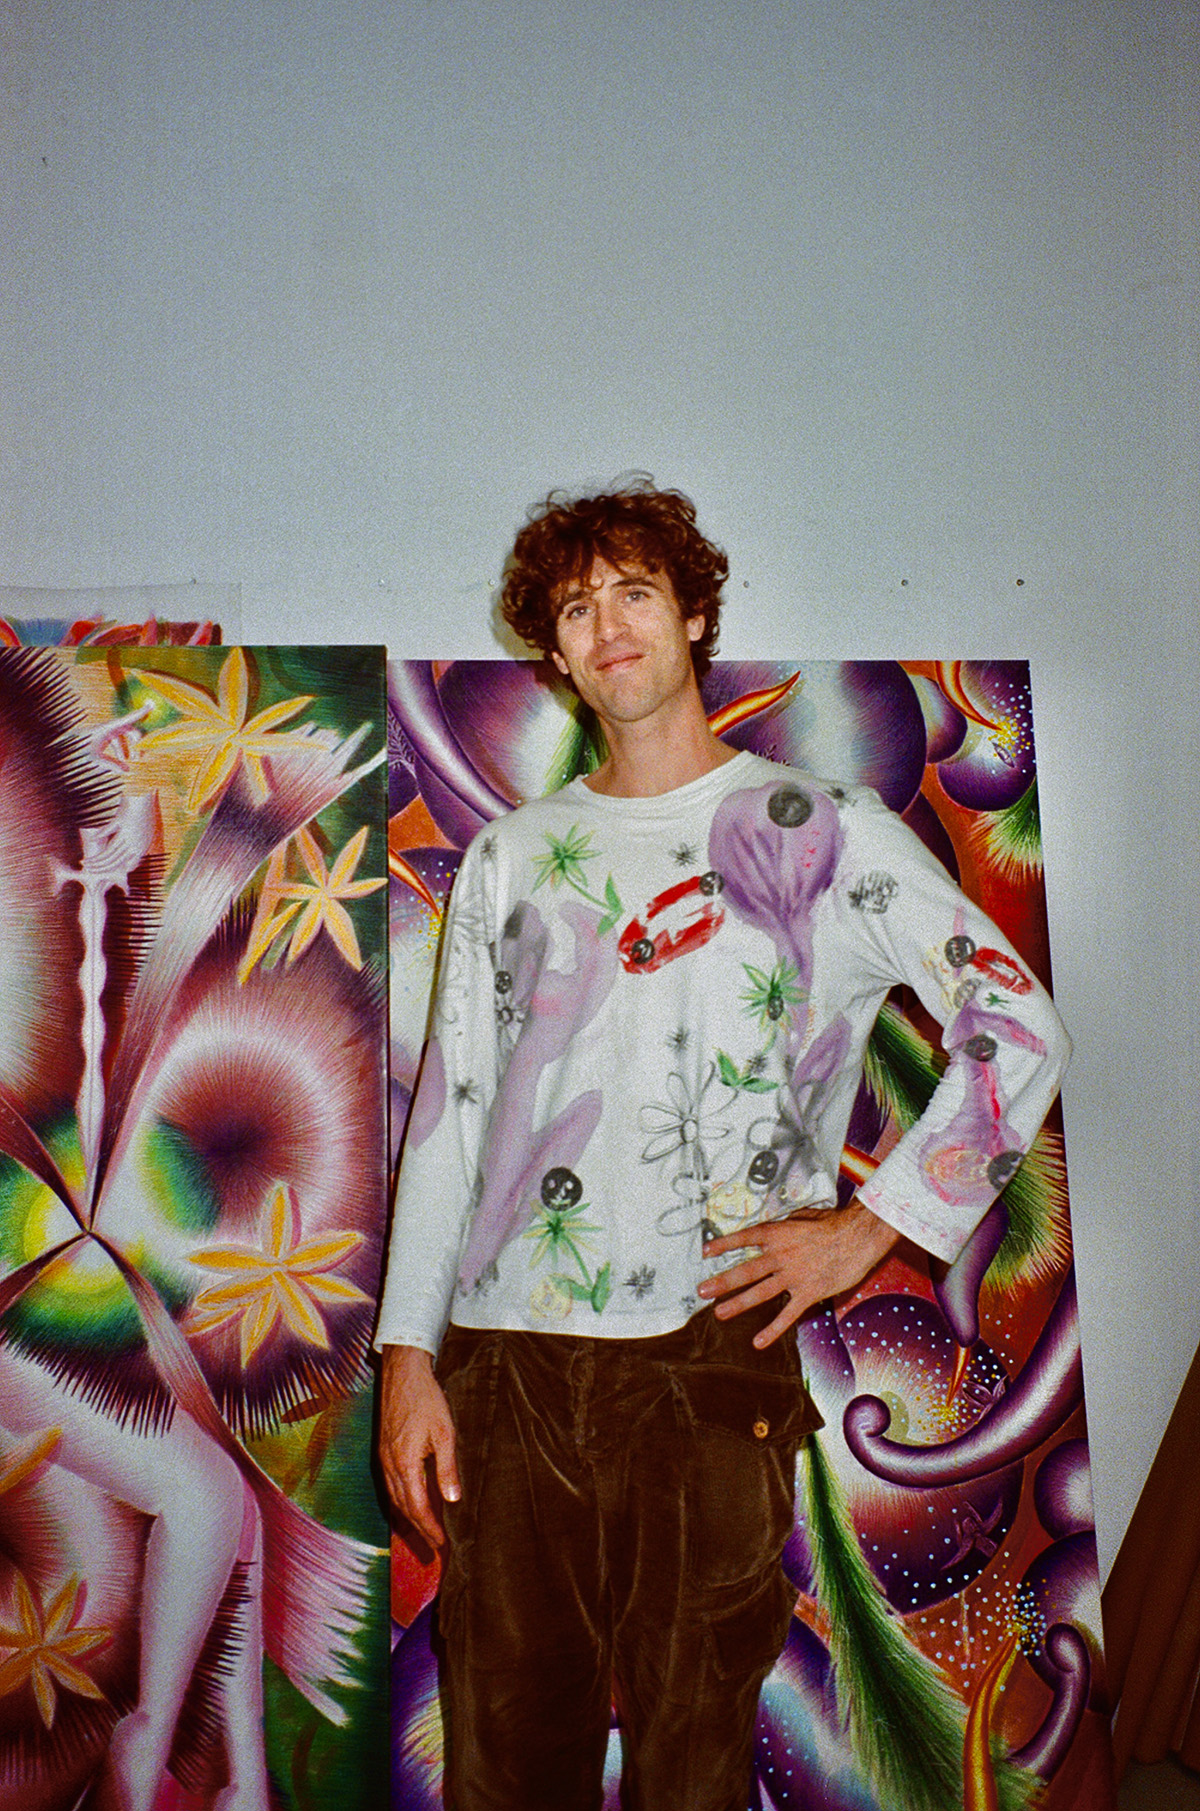 Arists in a white t-shirt in his studio, around his canvases of colourful pencil drawings